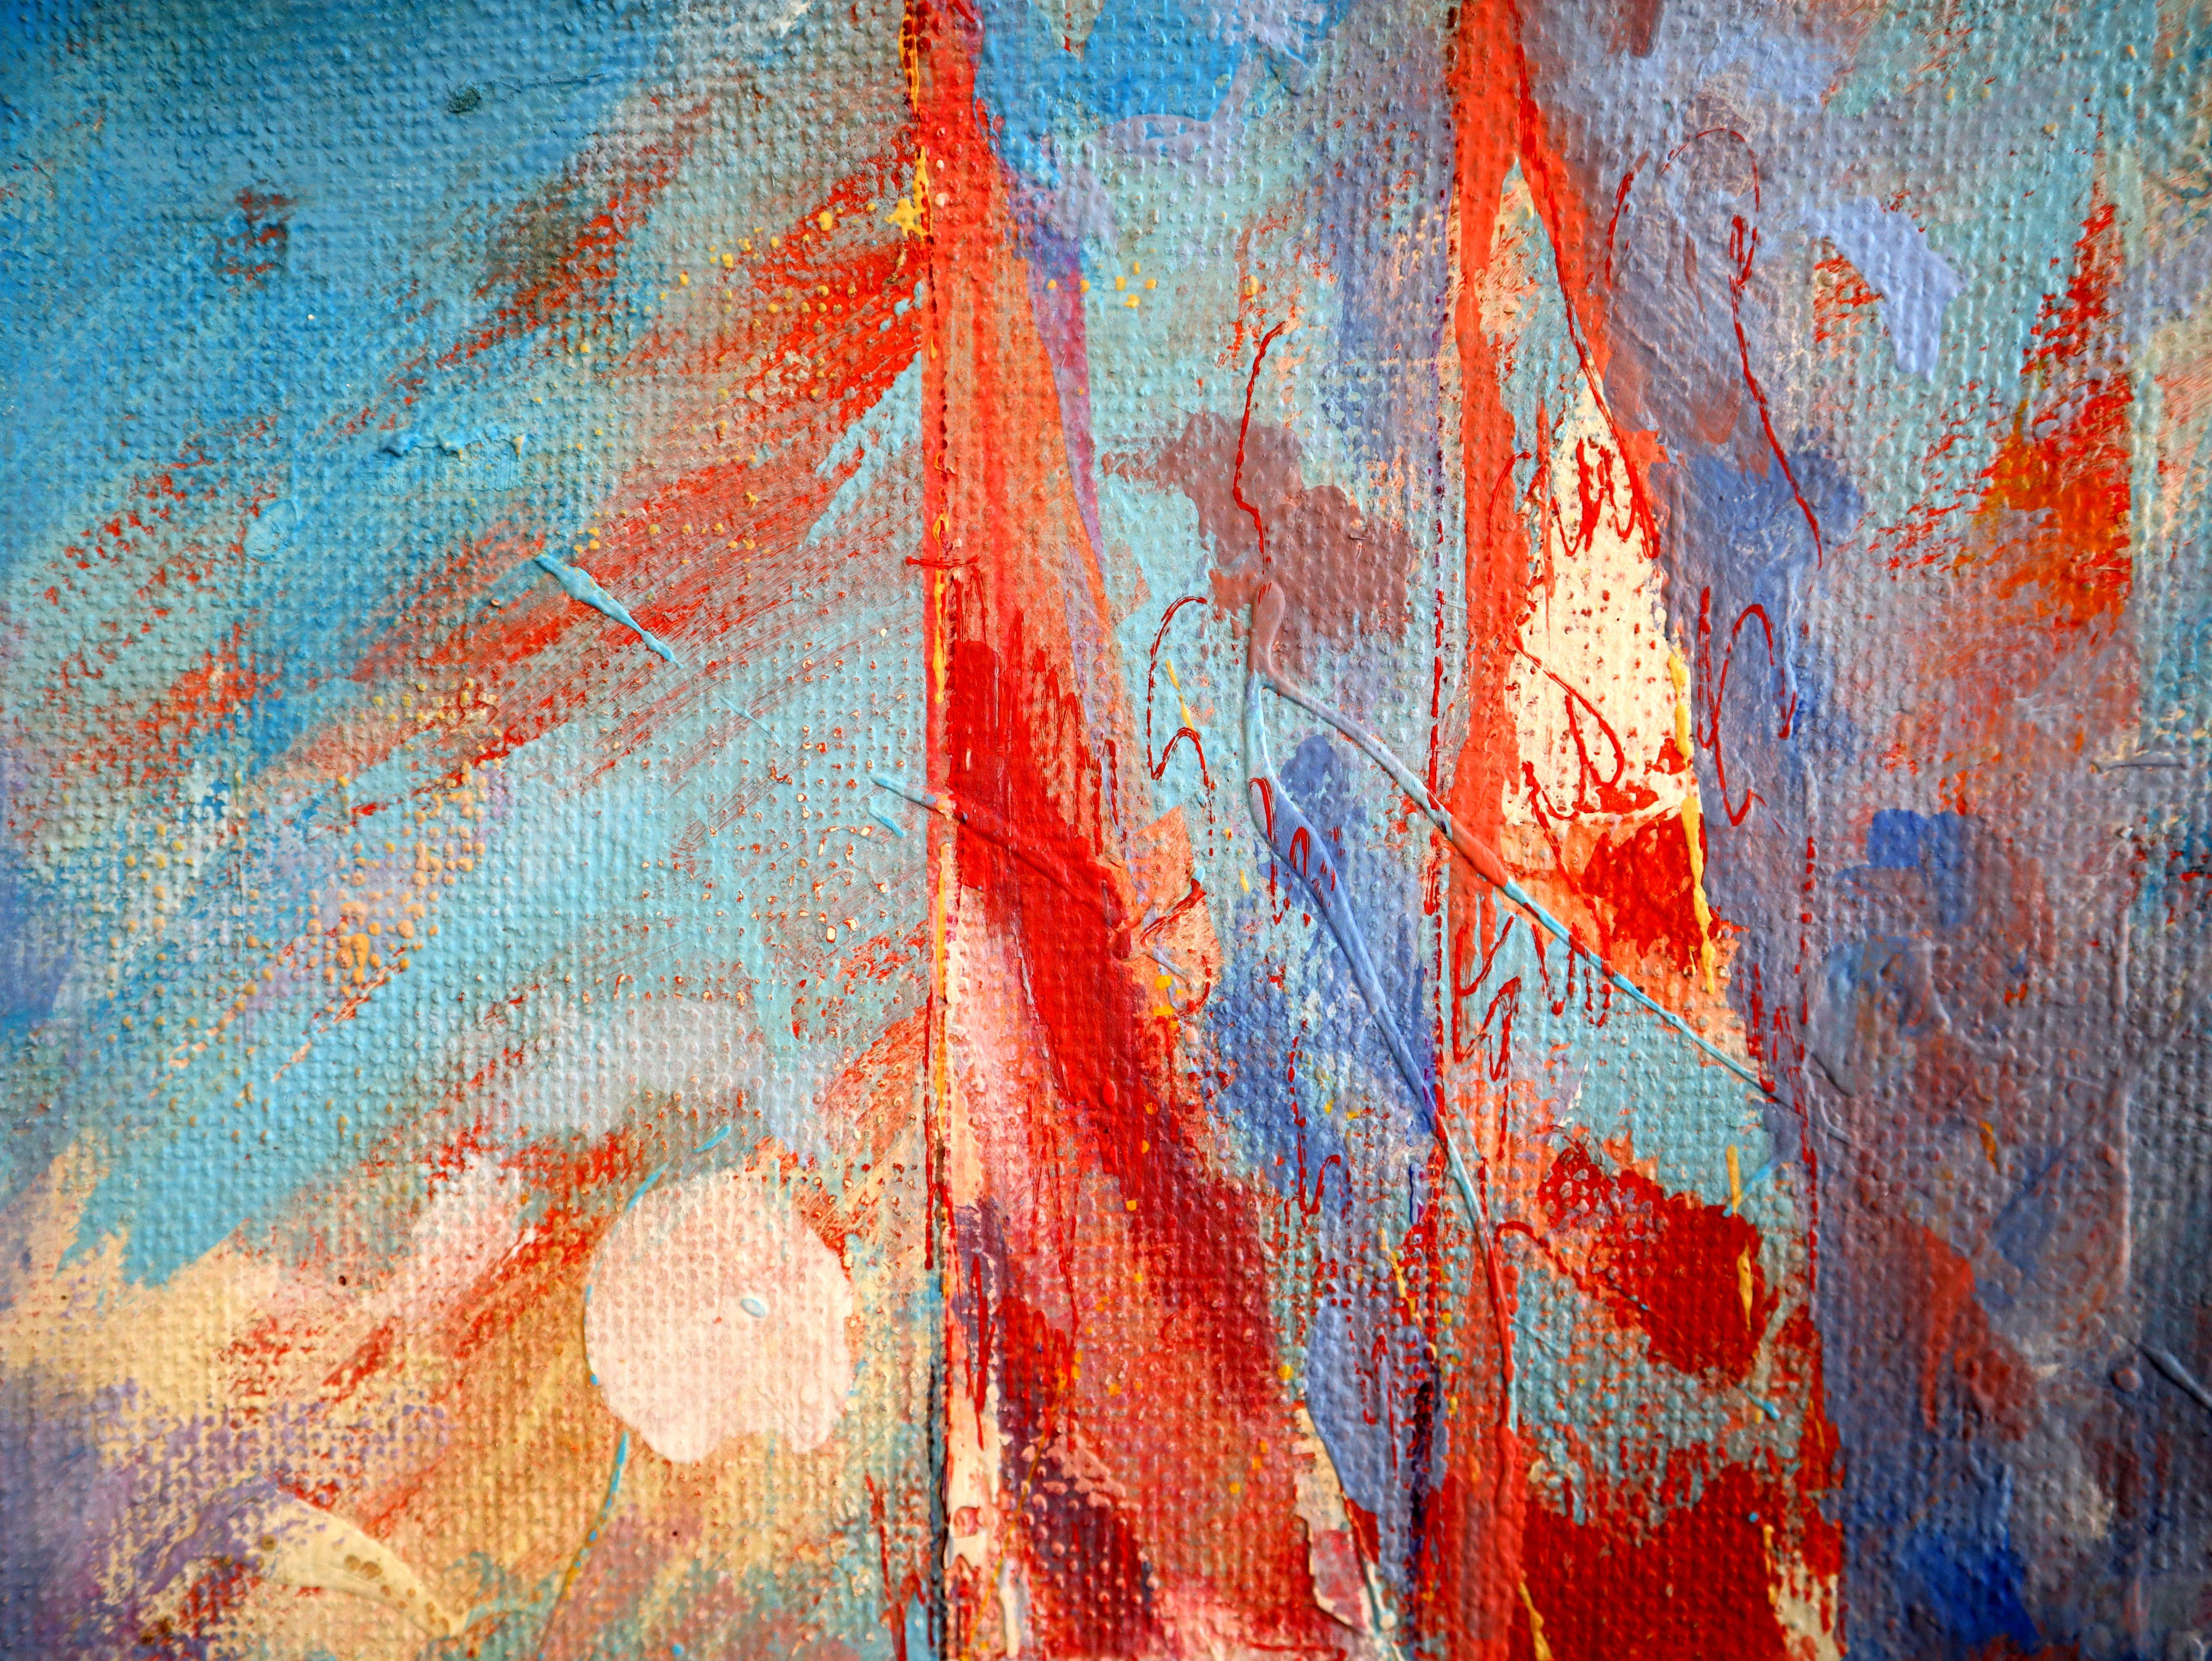 In this dance of acrylic and oil, I've harnessed expressionism and impressionism to capture the fleeting essence of tranquility and motion. Through vibrant hues and bold strokes, I've poured my soul into depicting the harmony of sails against the